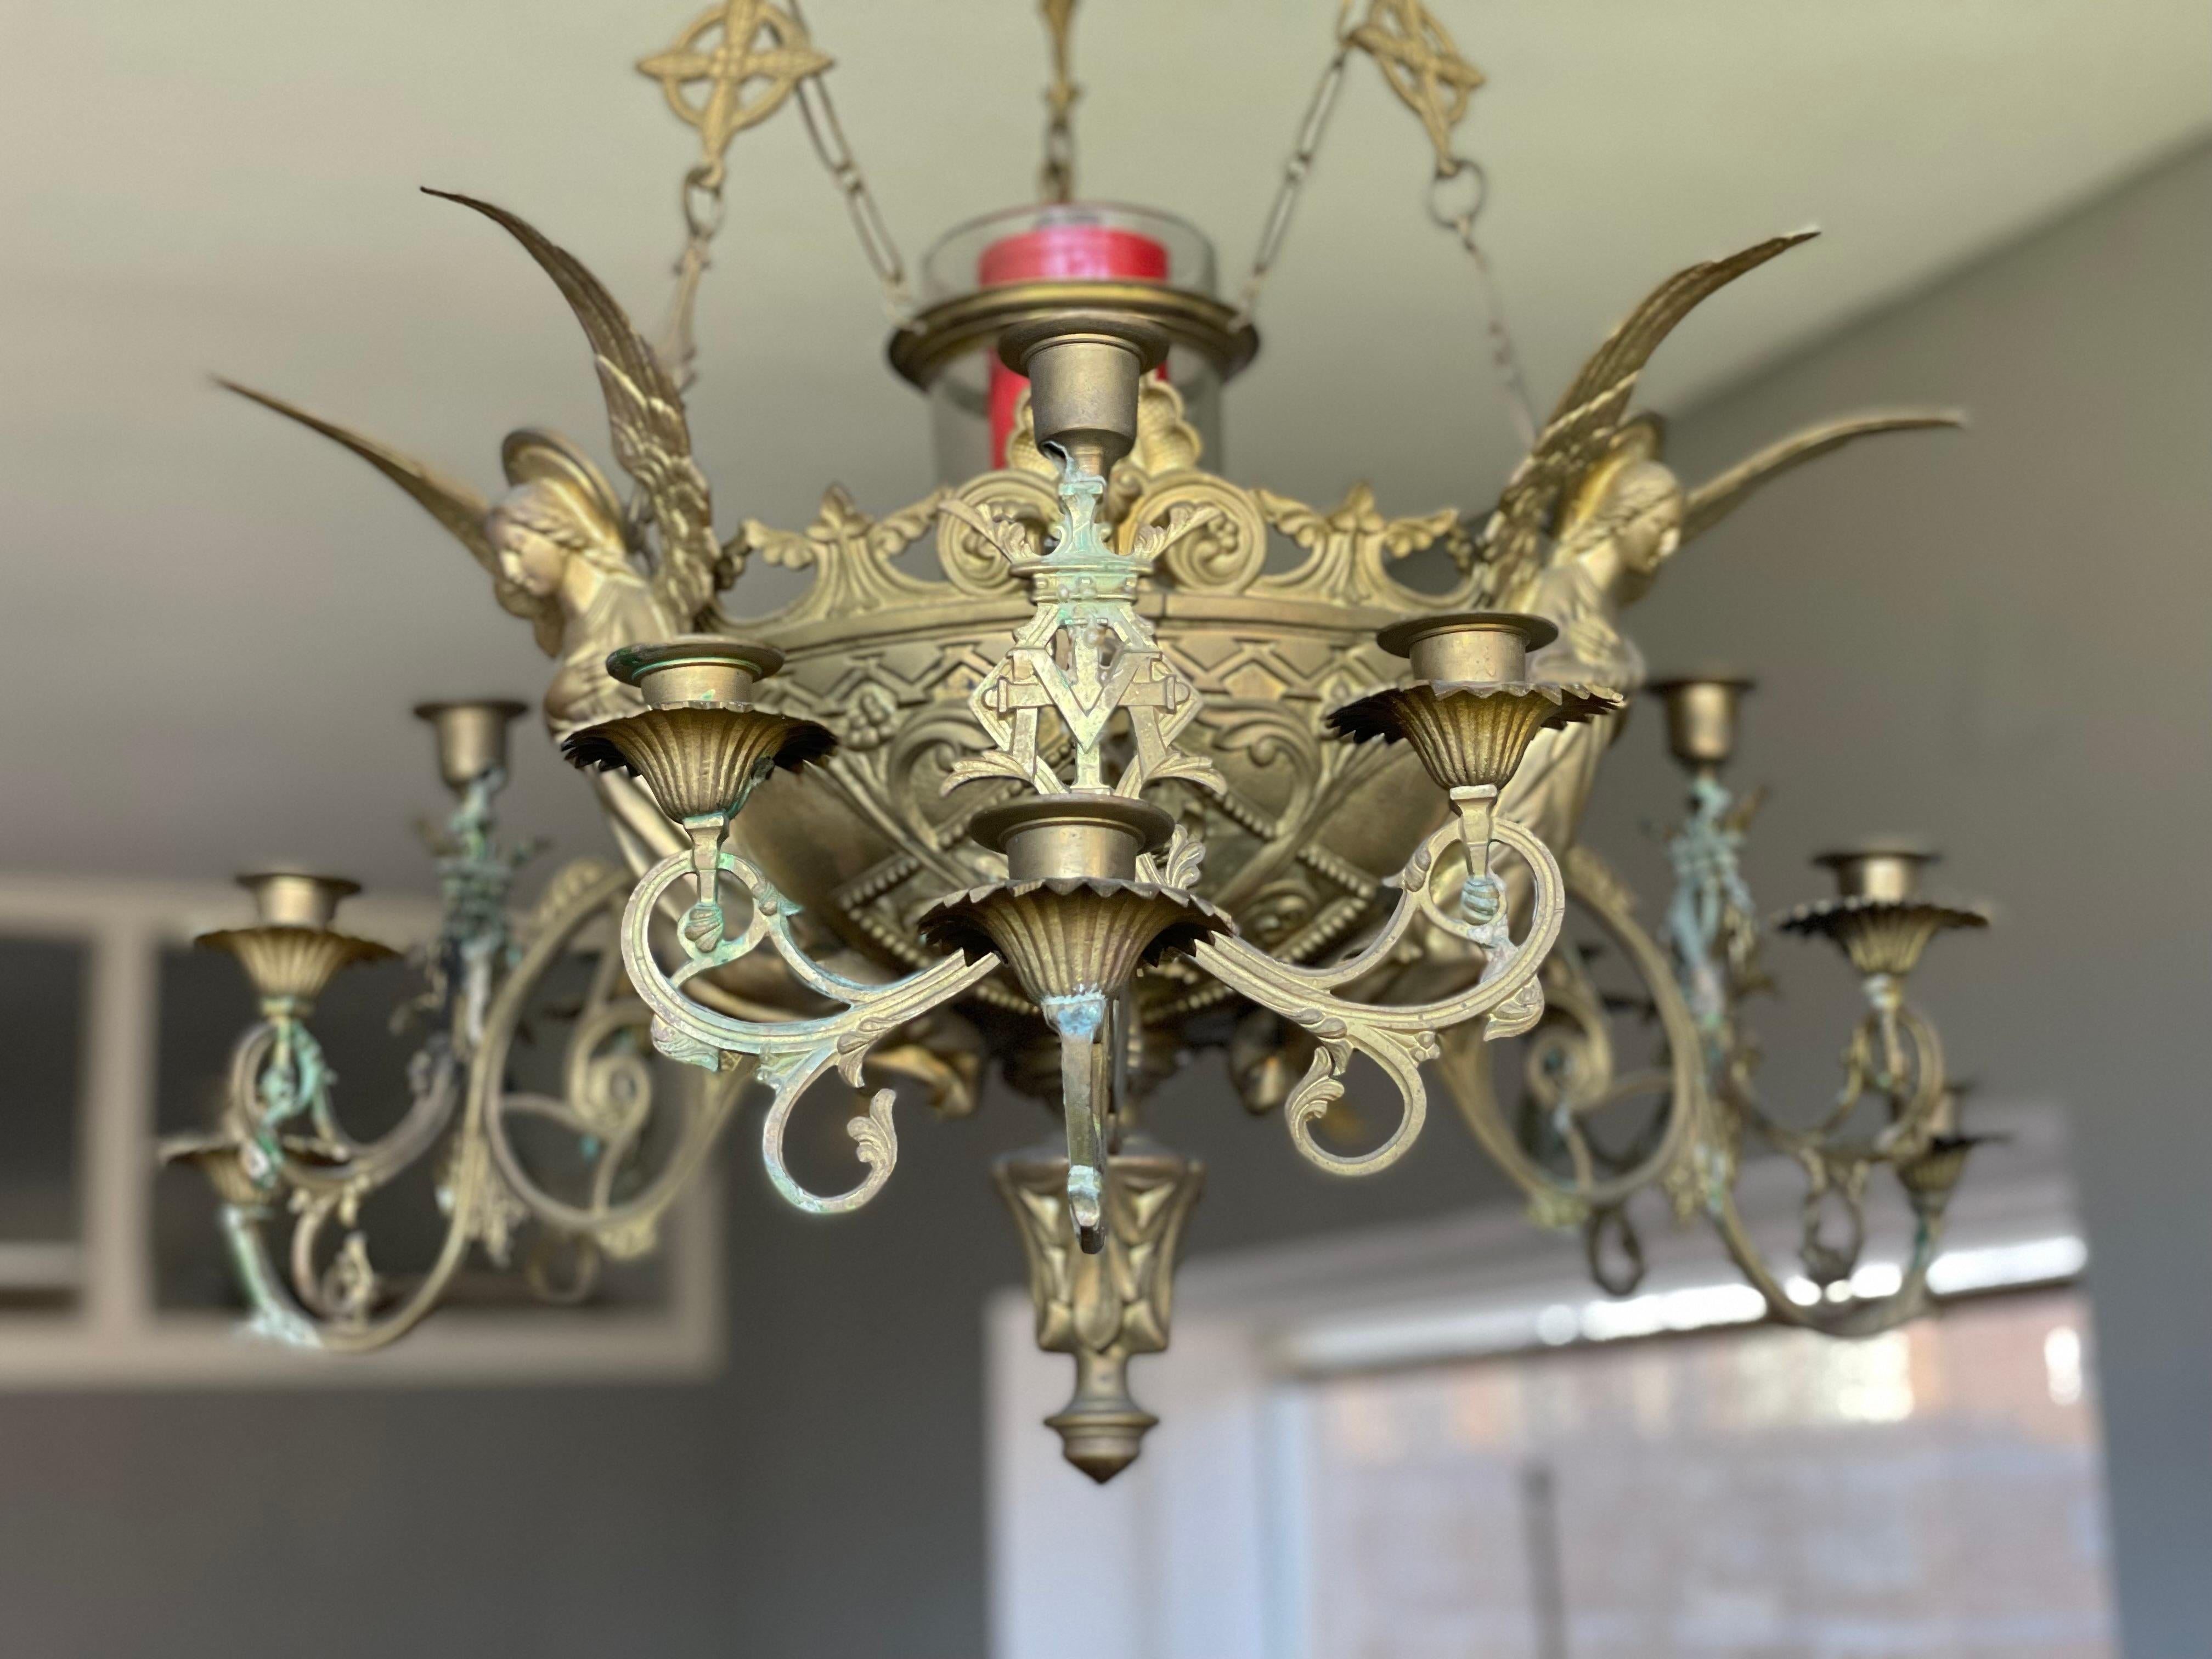 19th Century Bronze Gothic Revival Candle Chandelier w. Virgin Mary & Marian Cross Sculptures For Sale